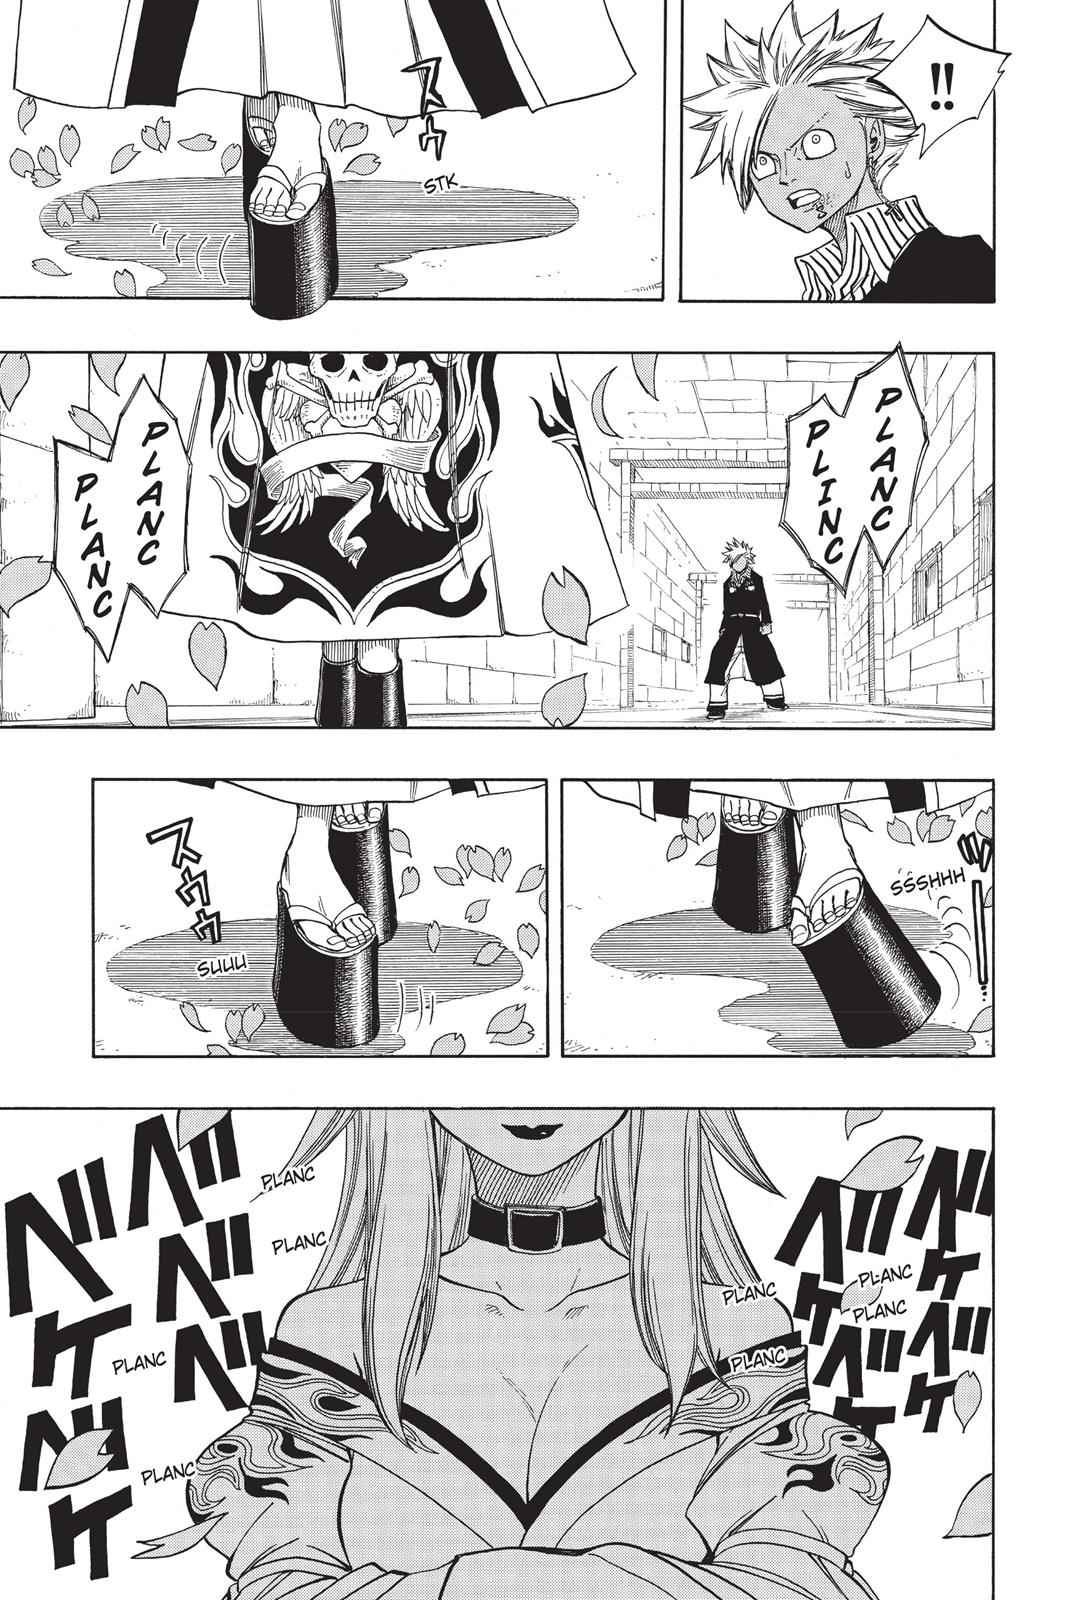  Chapter 90 image 011